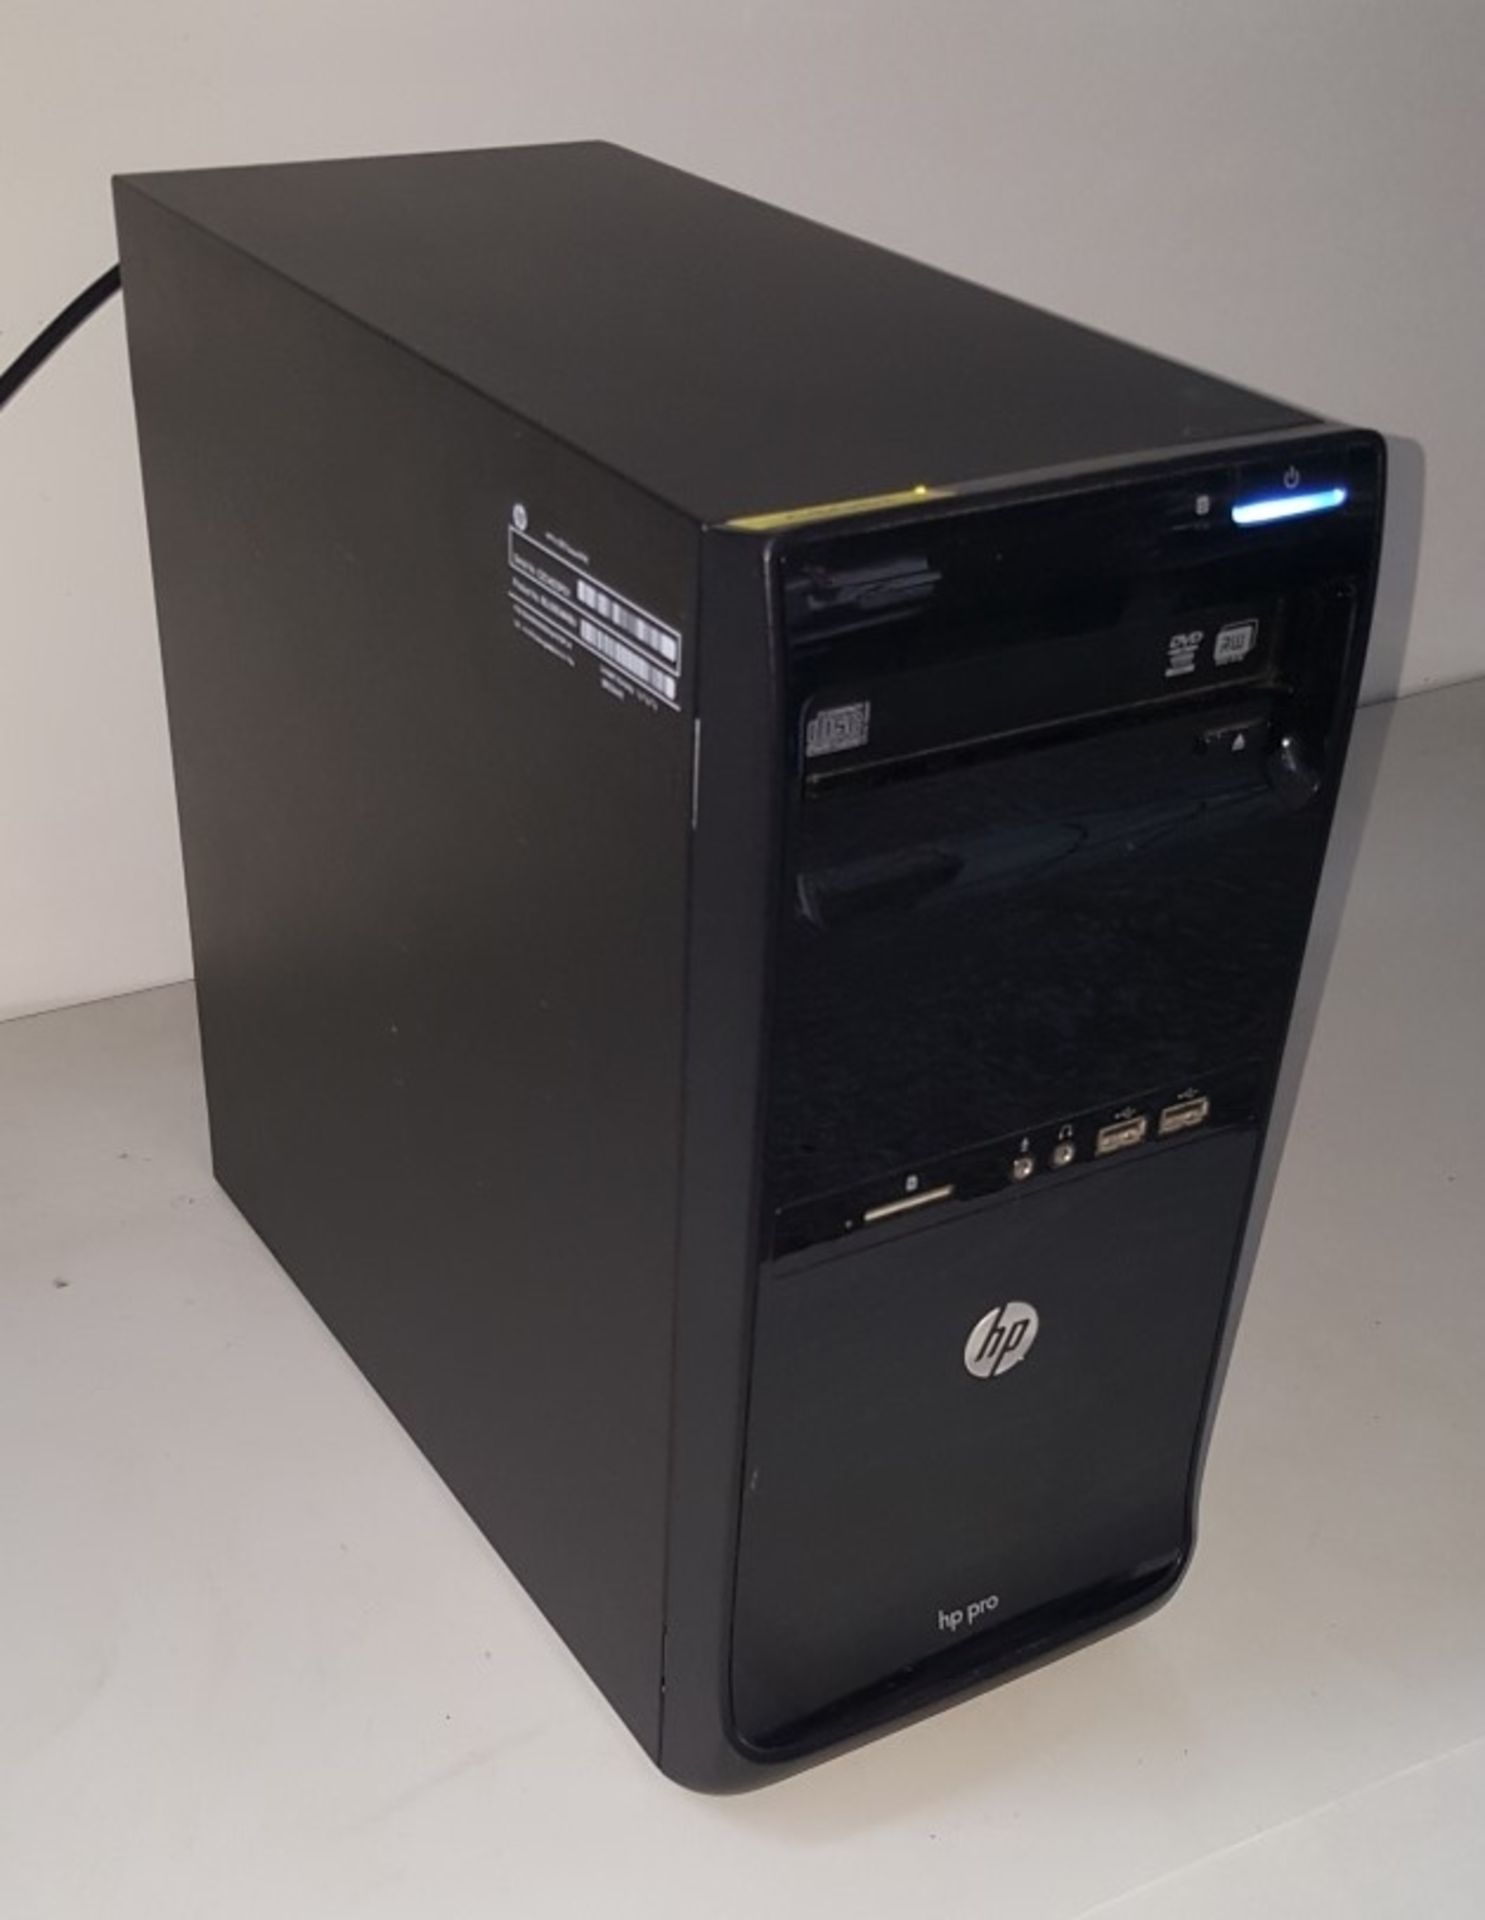 1 x HP Pro 3515 MT AMD A6-5400K 3.60GHz 4GB RAM Desktop PC - Ref BLT103 - Image 4 of 5